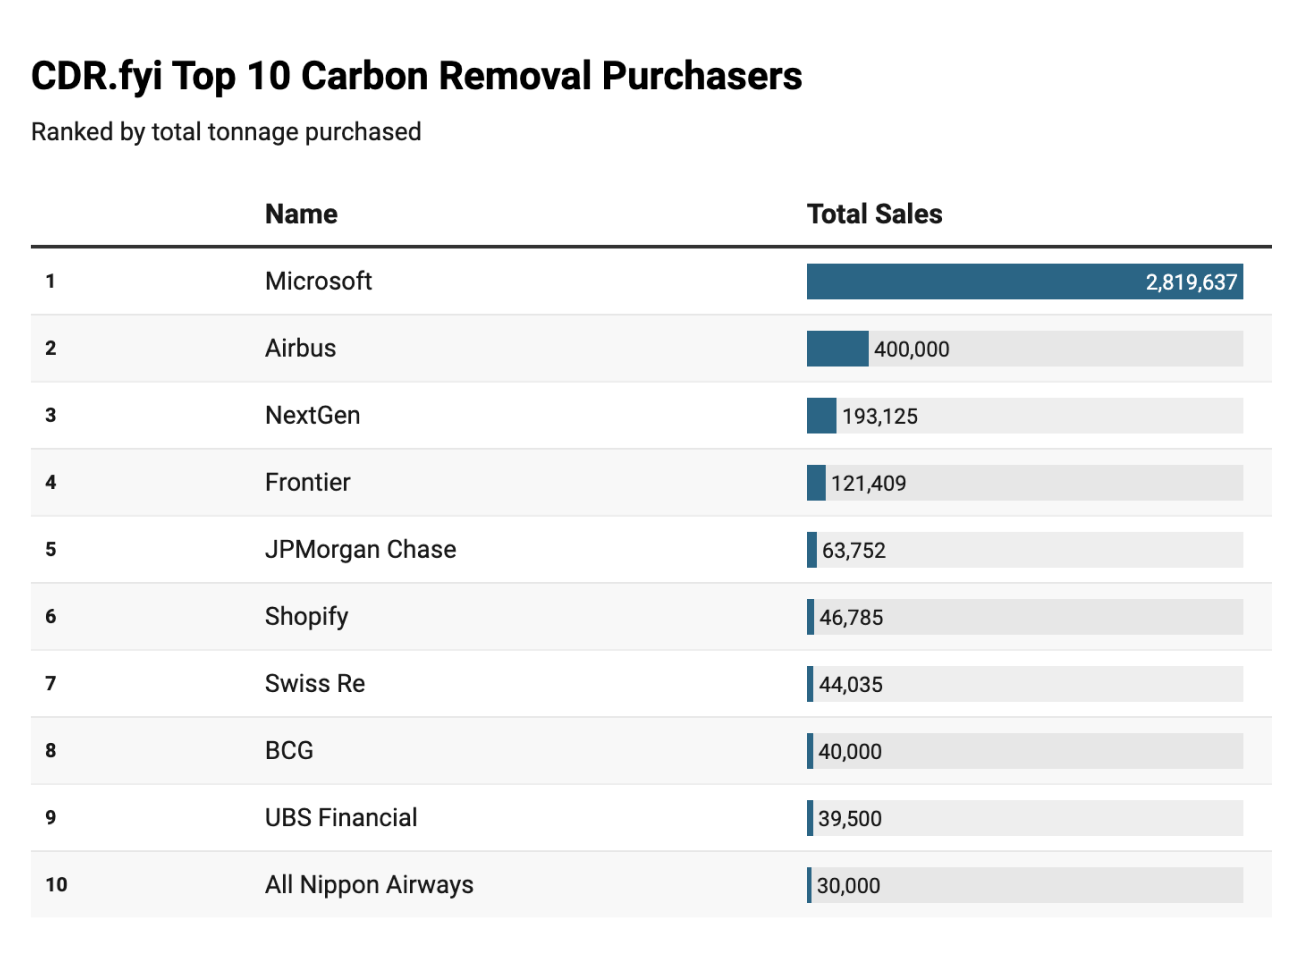 CDR.fyi Top 10 Carbon Removal Suppliers